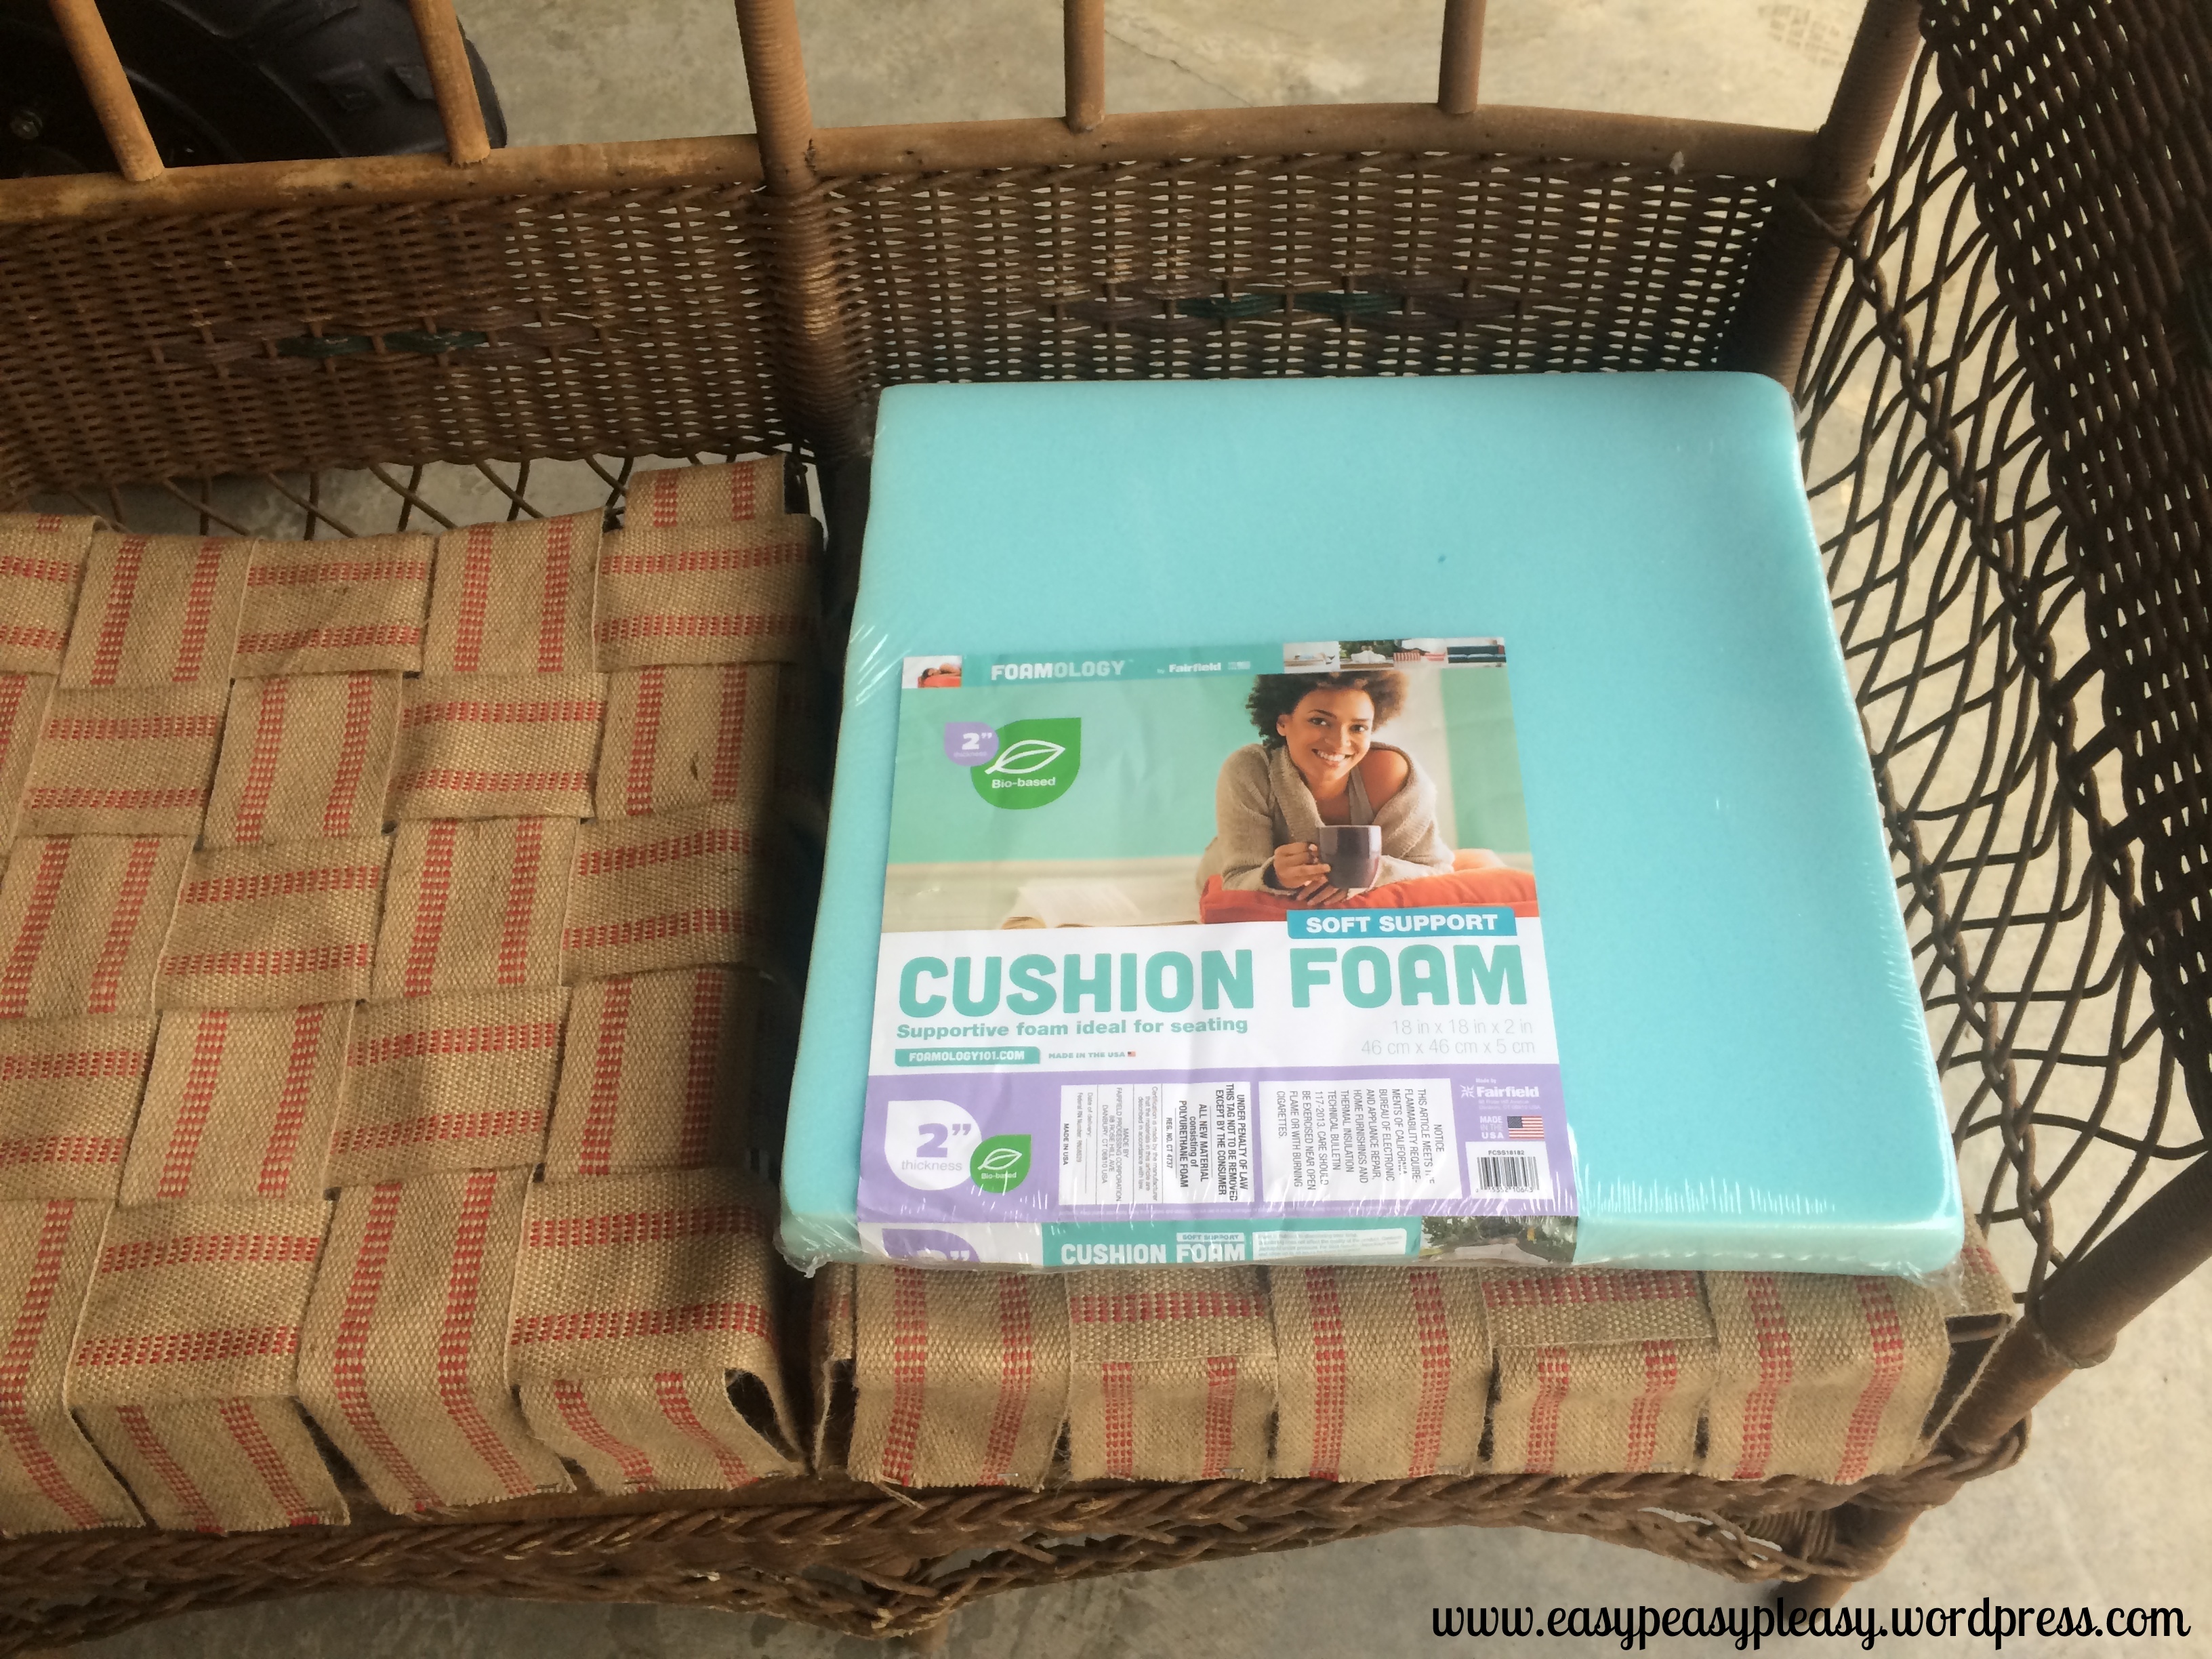 Restoring a Wicker Couch with spring loaded cushions